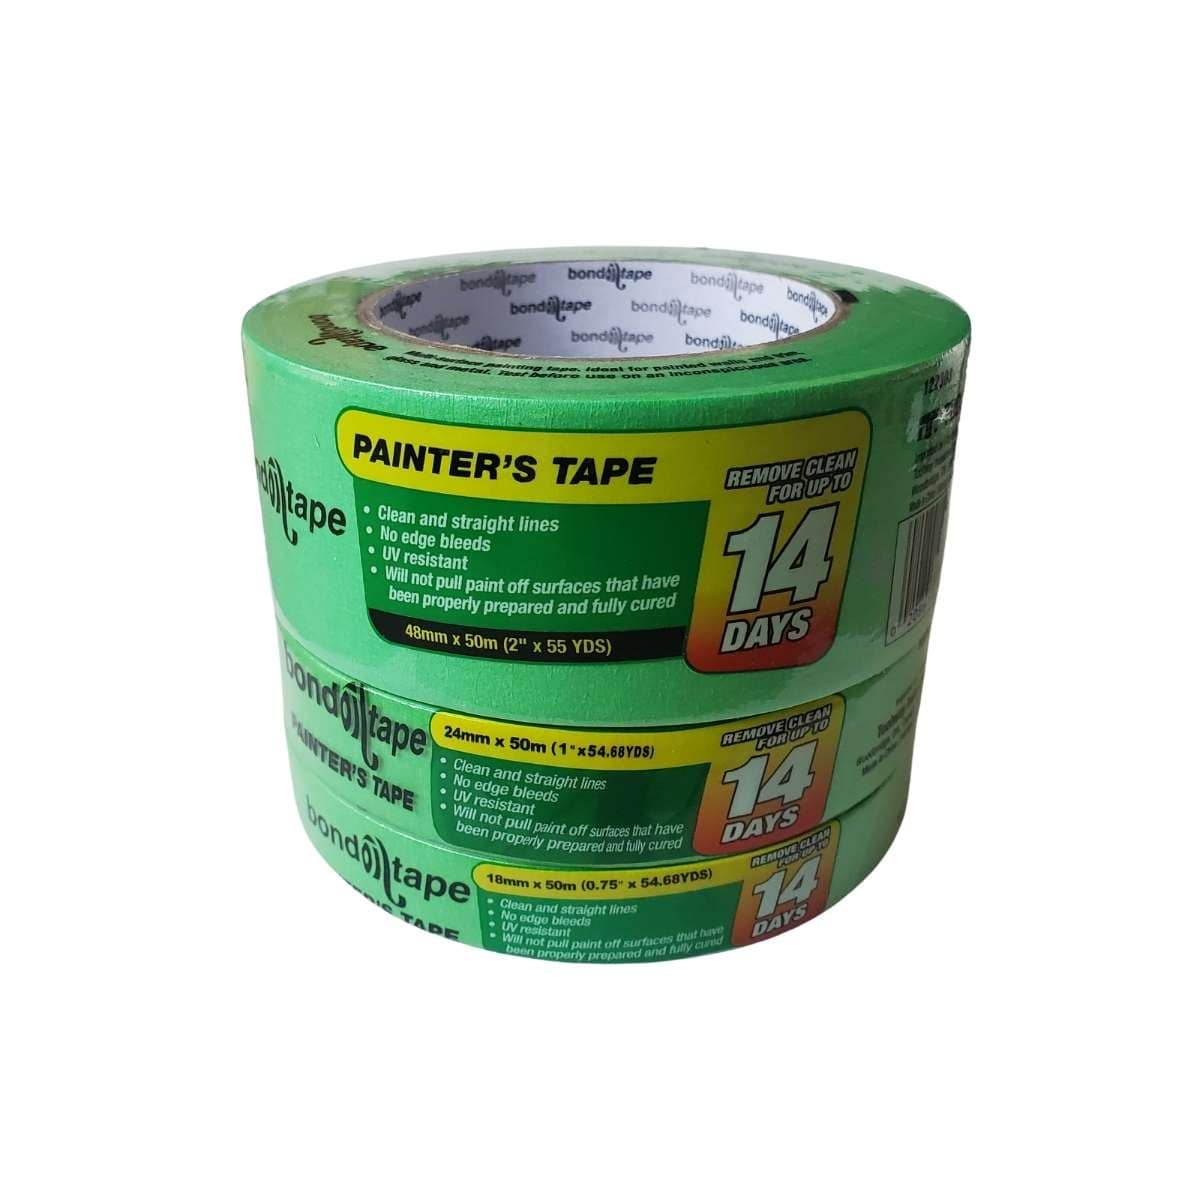 Toolway Painter's Tape Bond Tape - Painter's Tape - 24mm x 50m Roll - Item #122301